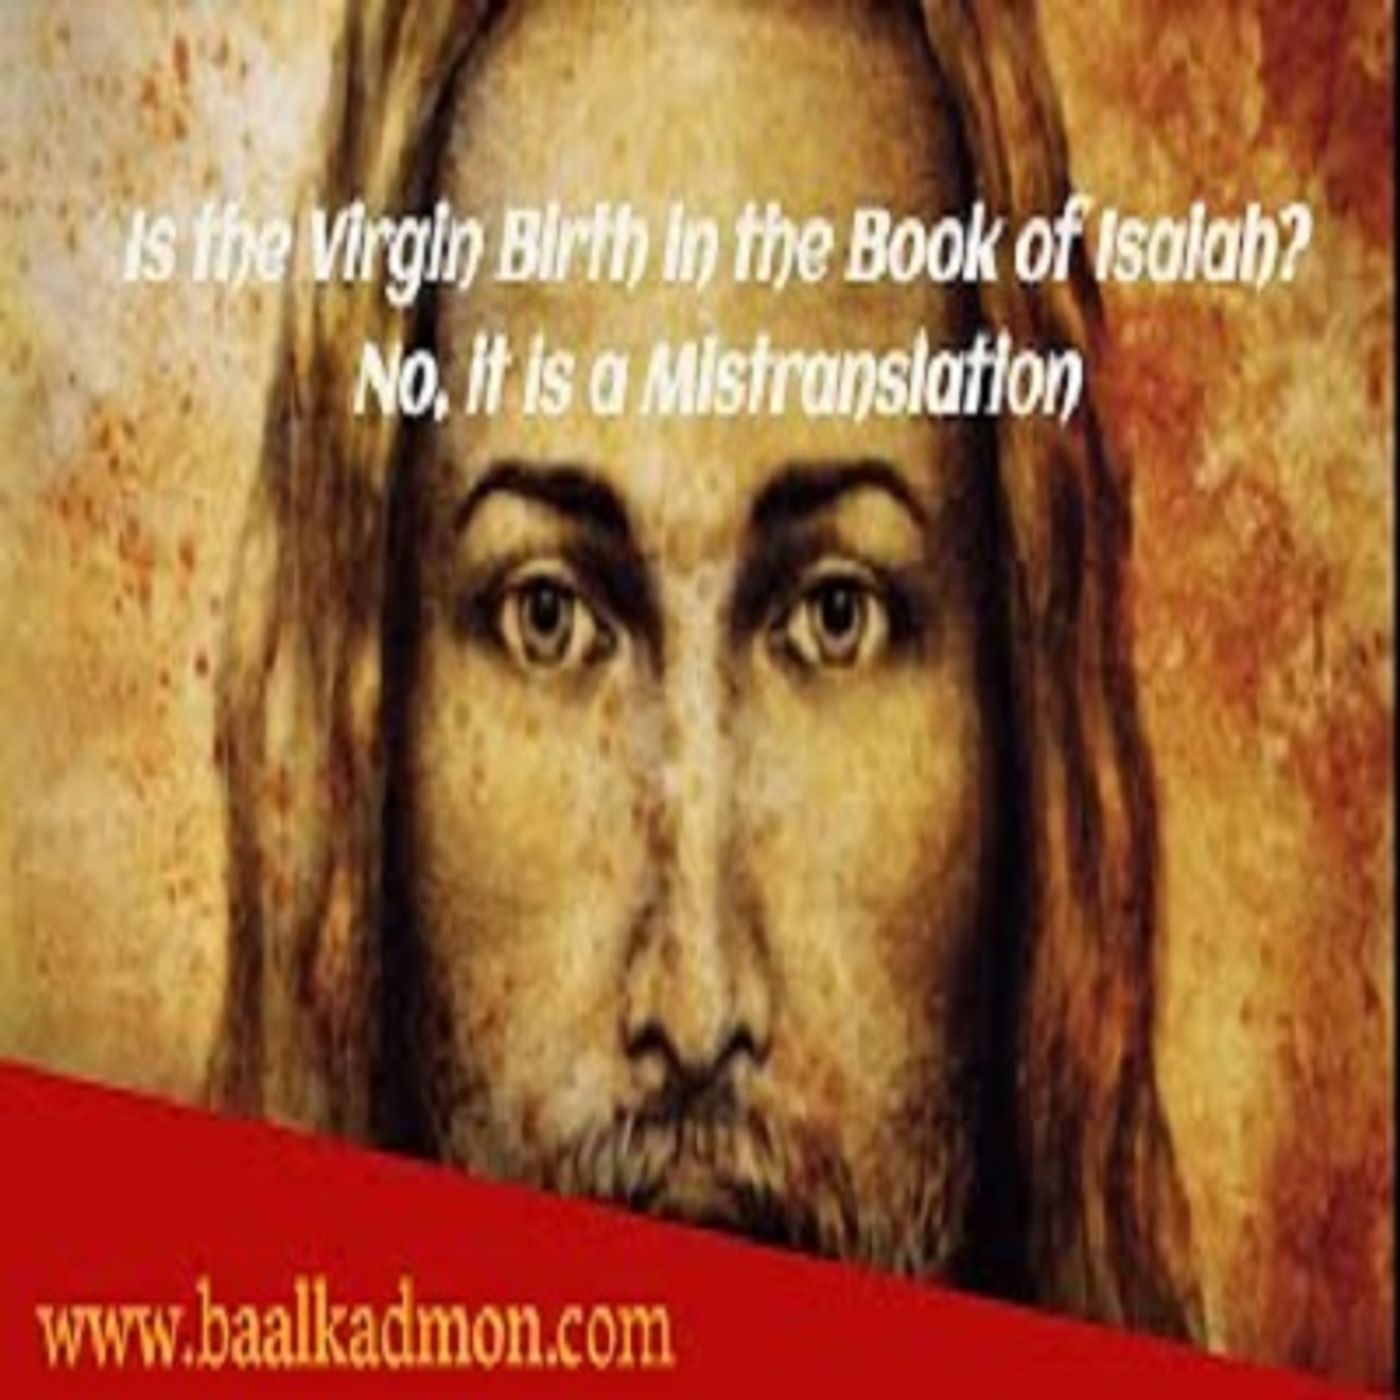 Virgin Birth in the Book of Isaiah_ No, it is a Mistranslation